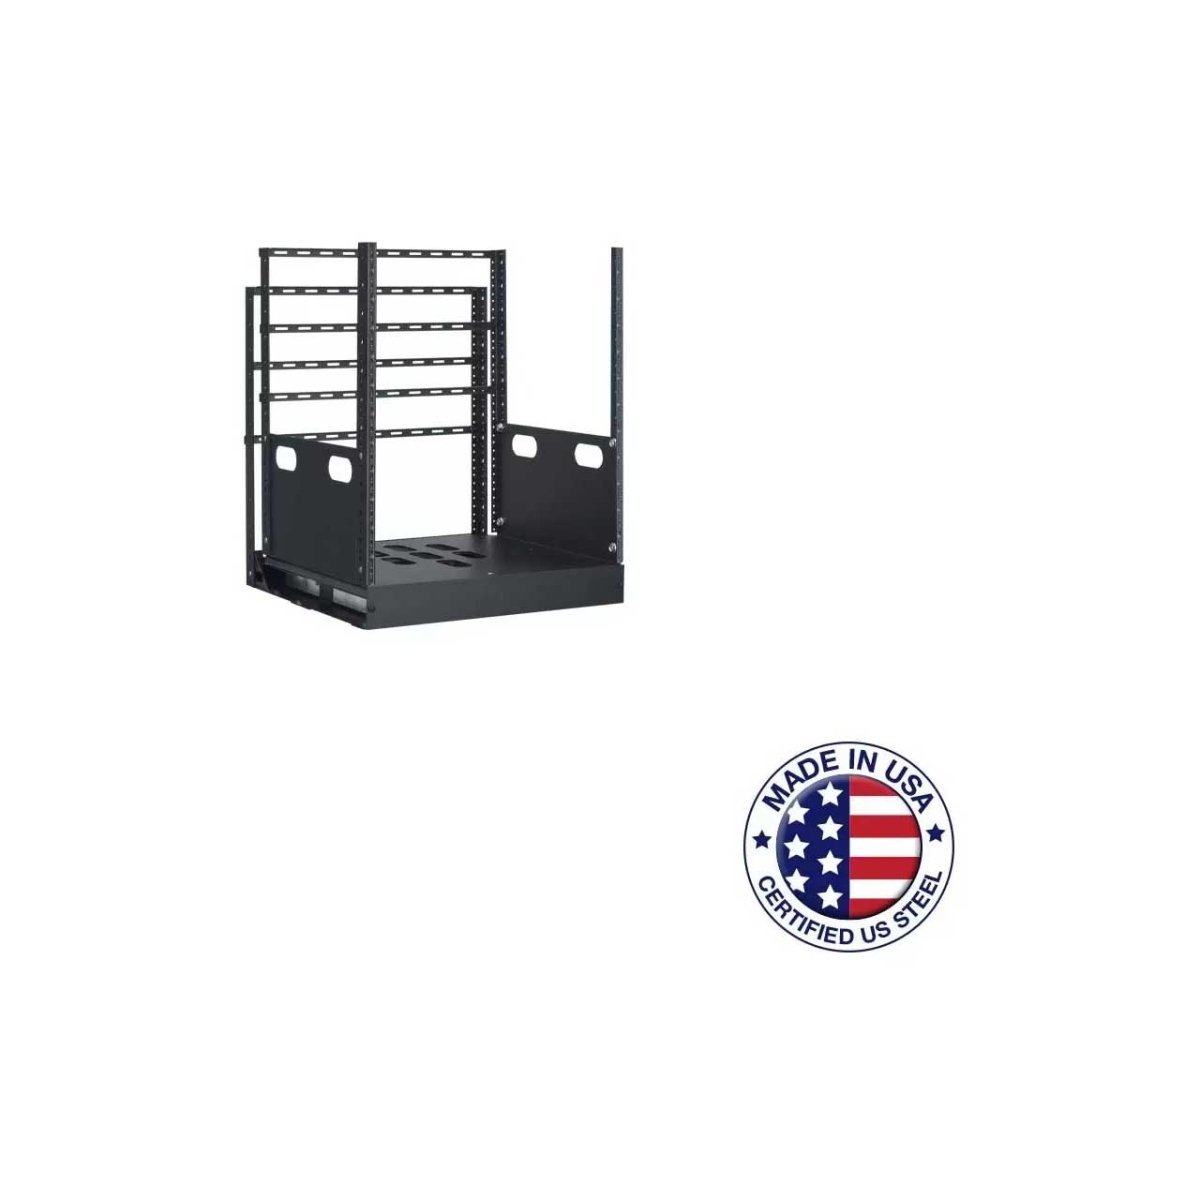 Picture of Lowell Manufacturing LMC-LPTR4-1219 LPTR4-1219 12RU Pull & Turn Millwork Rack with Four Support Rails - 19 in. Deep